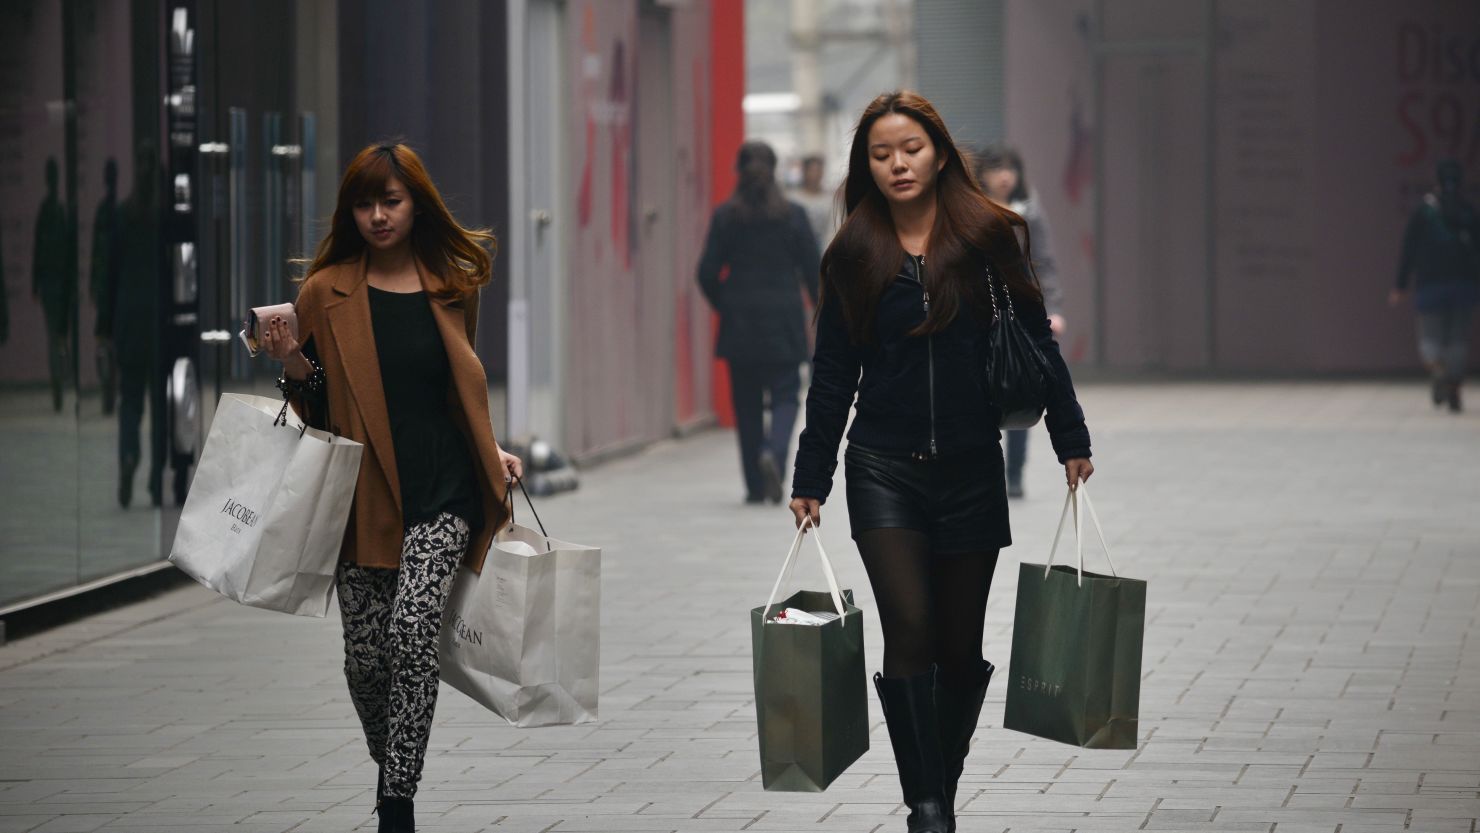 Two women walk with shopping bags in Beijing, China, on April 23.